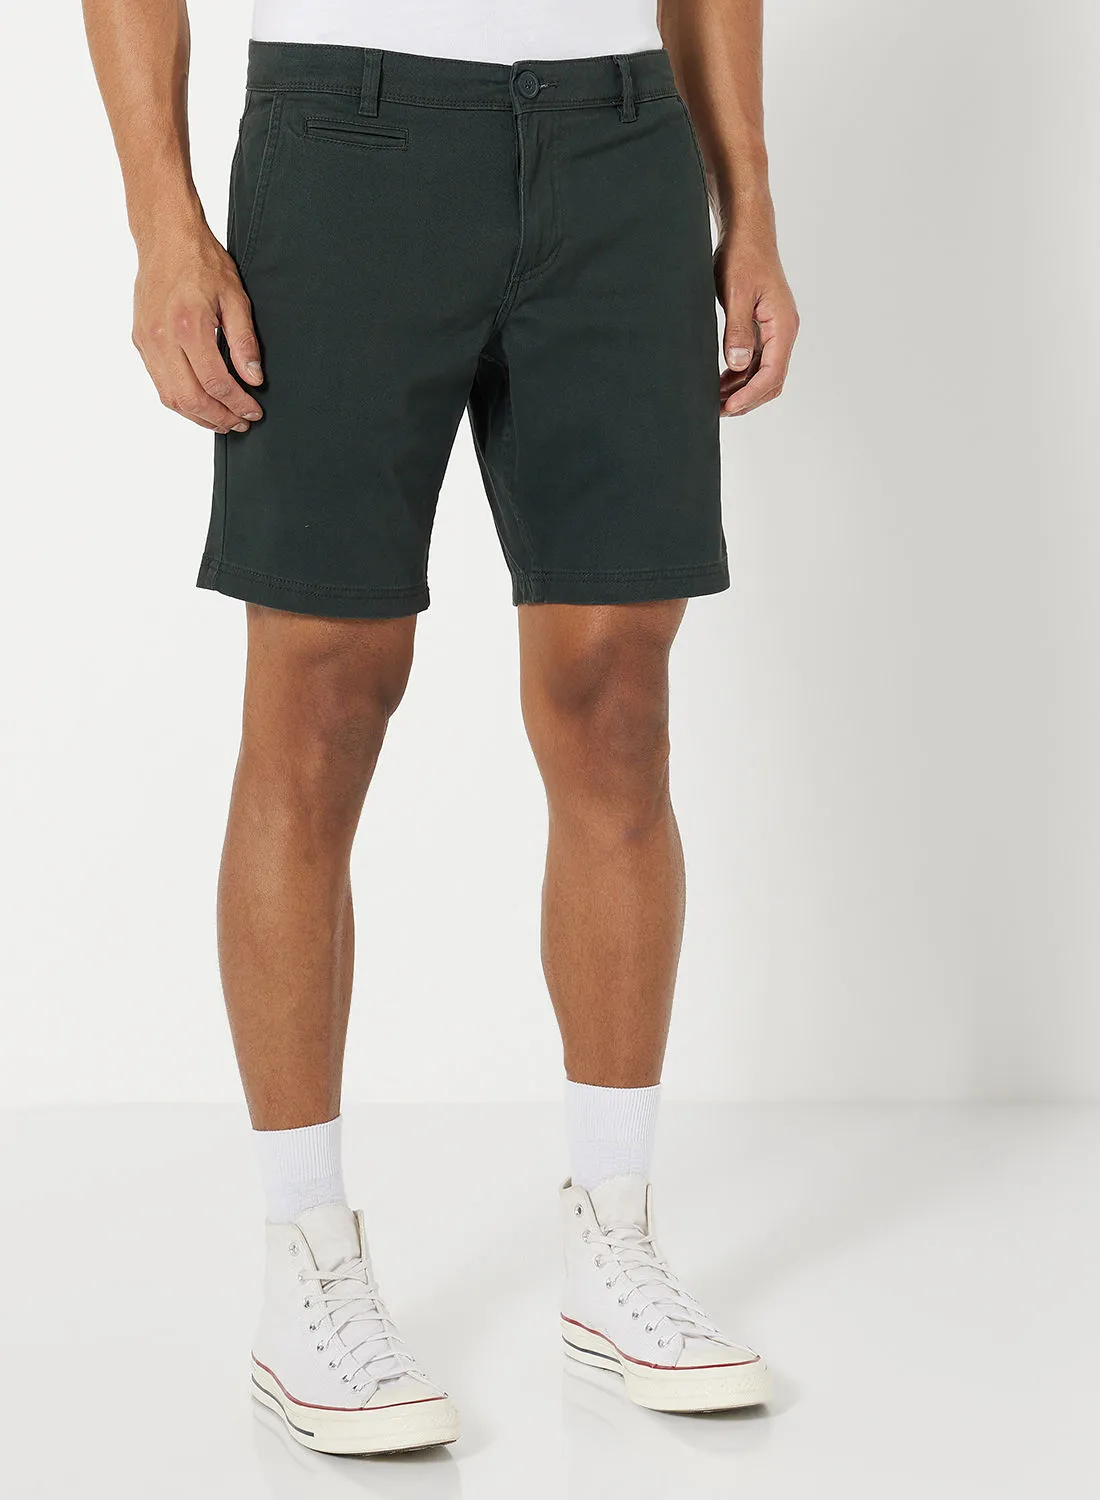 Noon East Solid Pattern Premium Shorts Olive